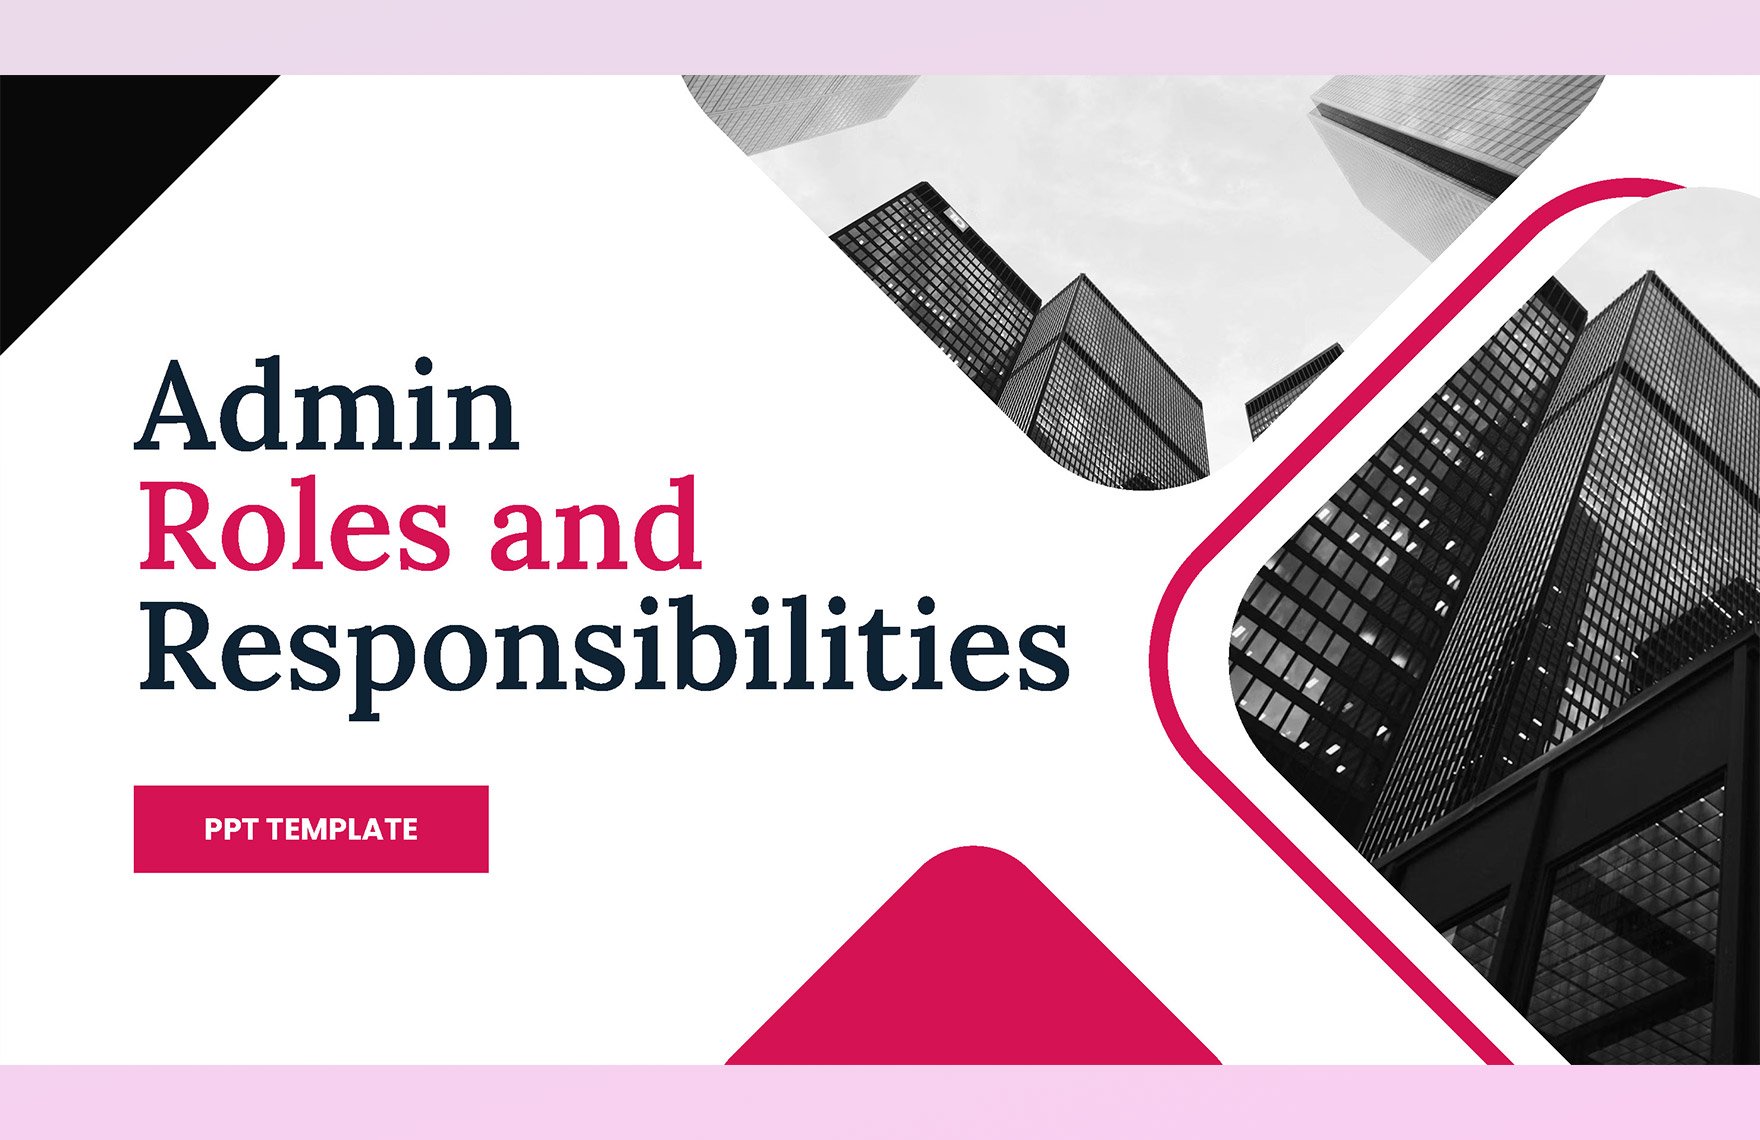 Admin Roles and Responsibilities PPT Template